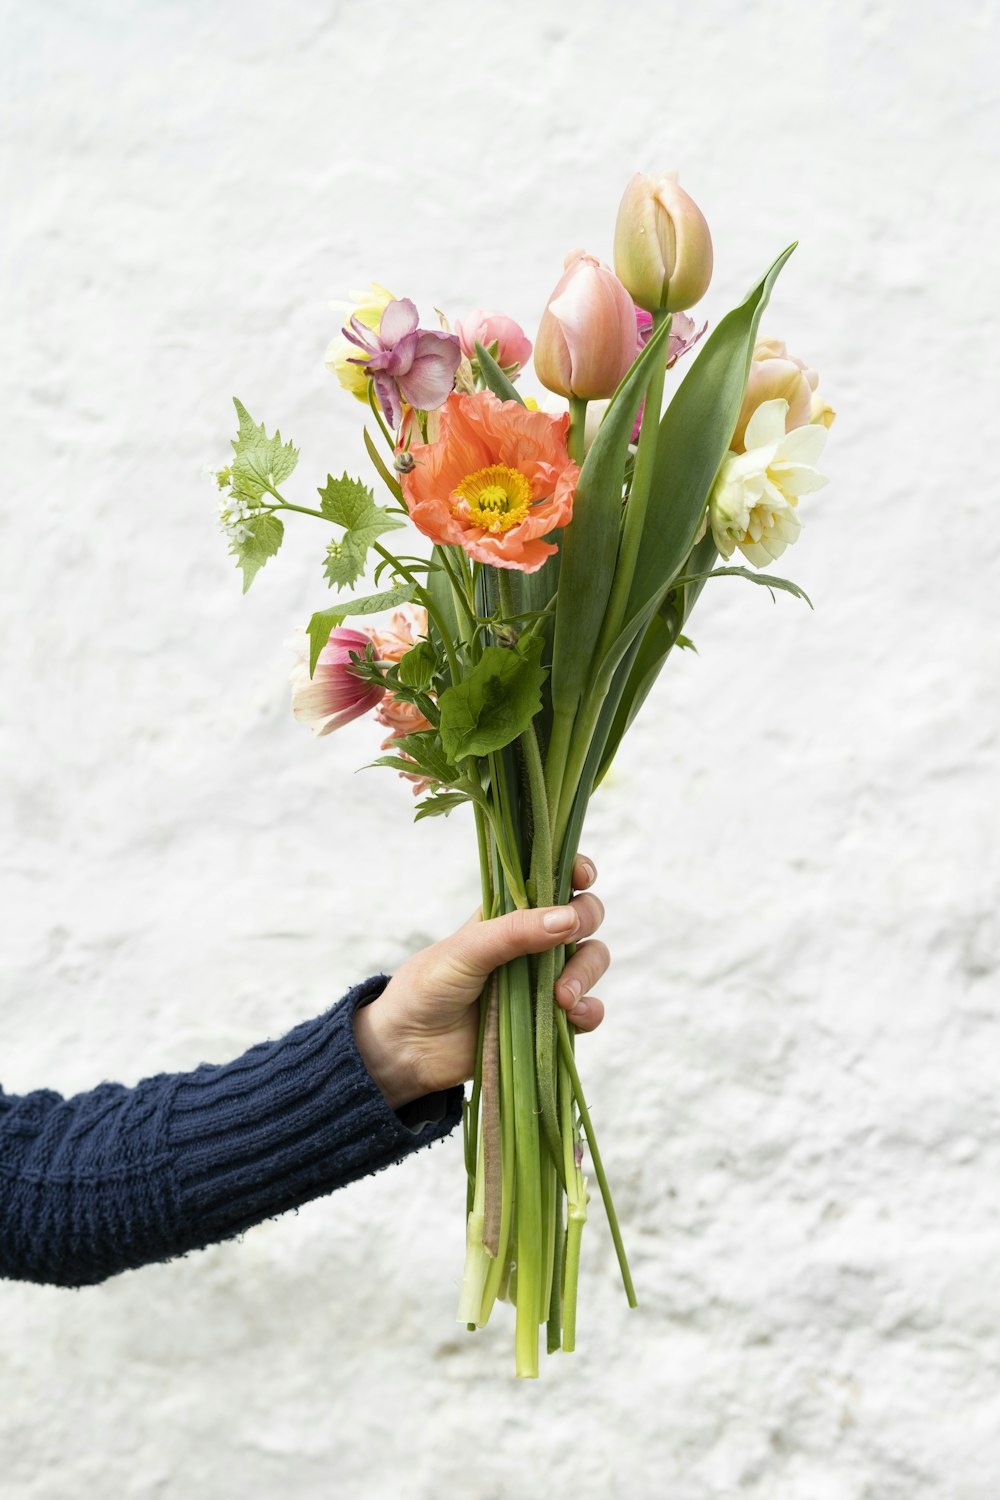 Person holding bouquet of flowers photo – Free Usa Image on Unsplash